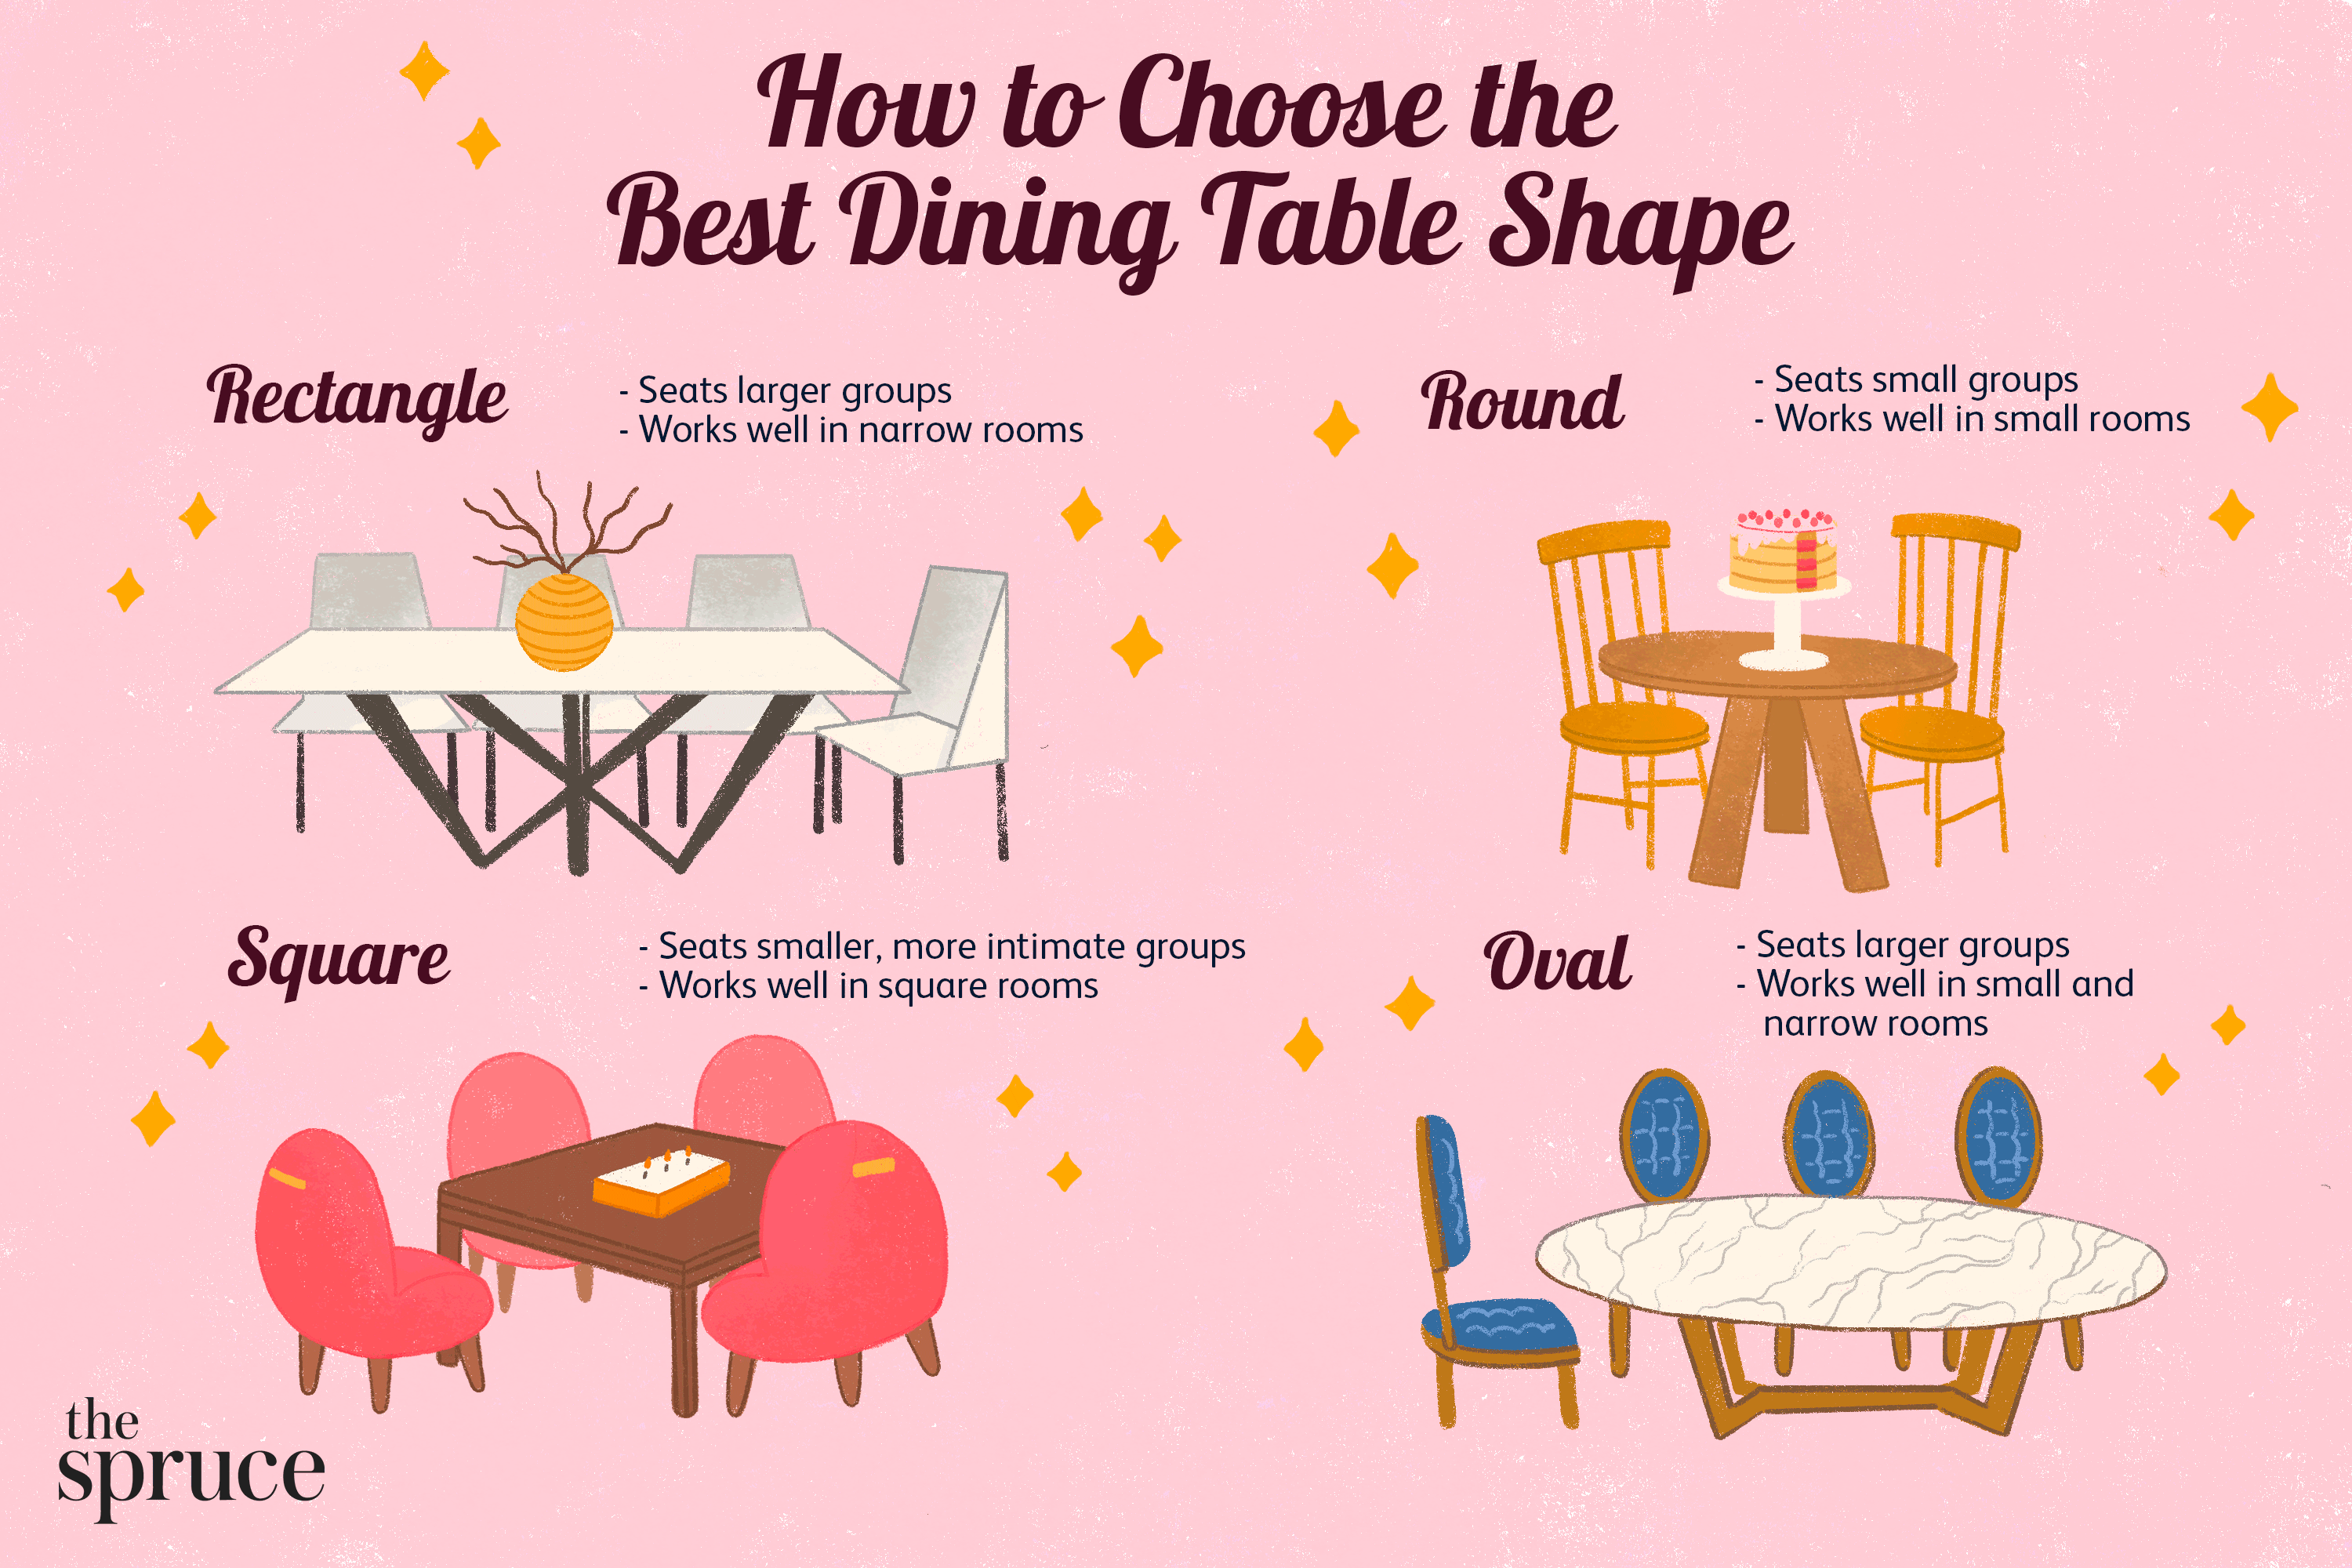 The Best Dining Tables According to the Room 38968 1 - The Best Dining Tables According to the Room